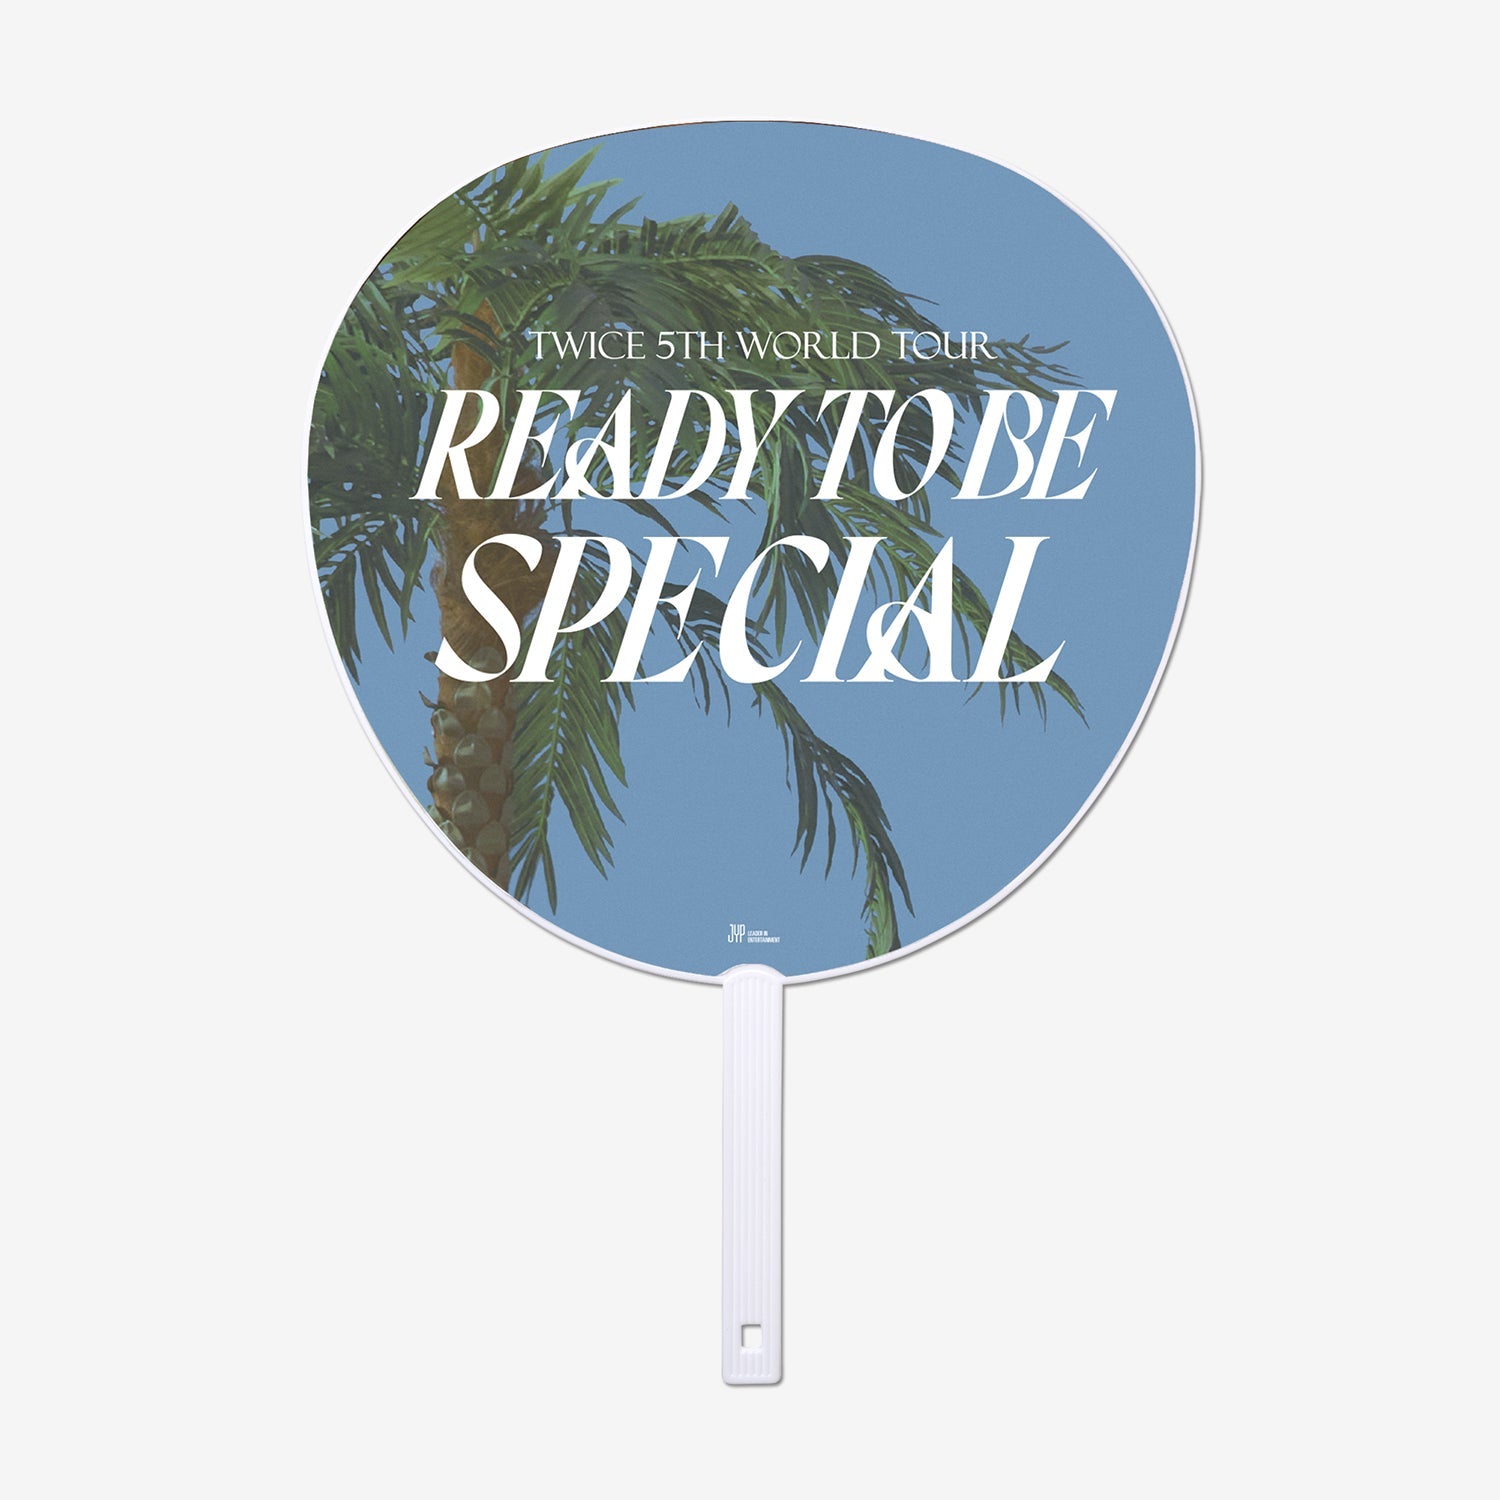 IMAGE PICKET - SANA【SPECIAL】/ TWICE『READY TO BE SPECIAL』